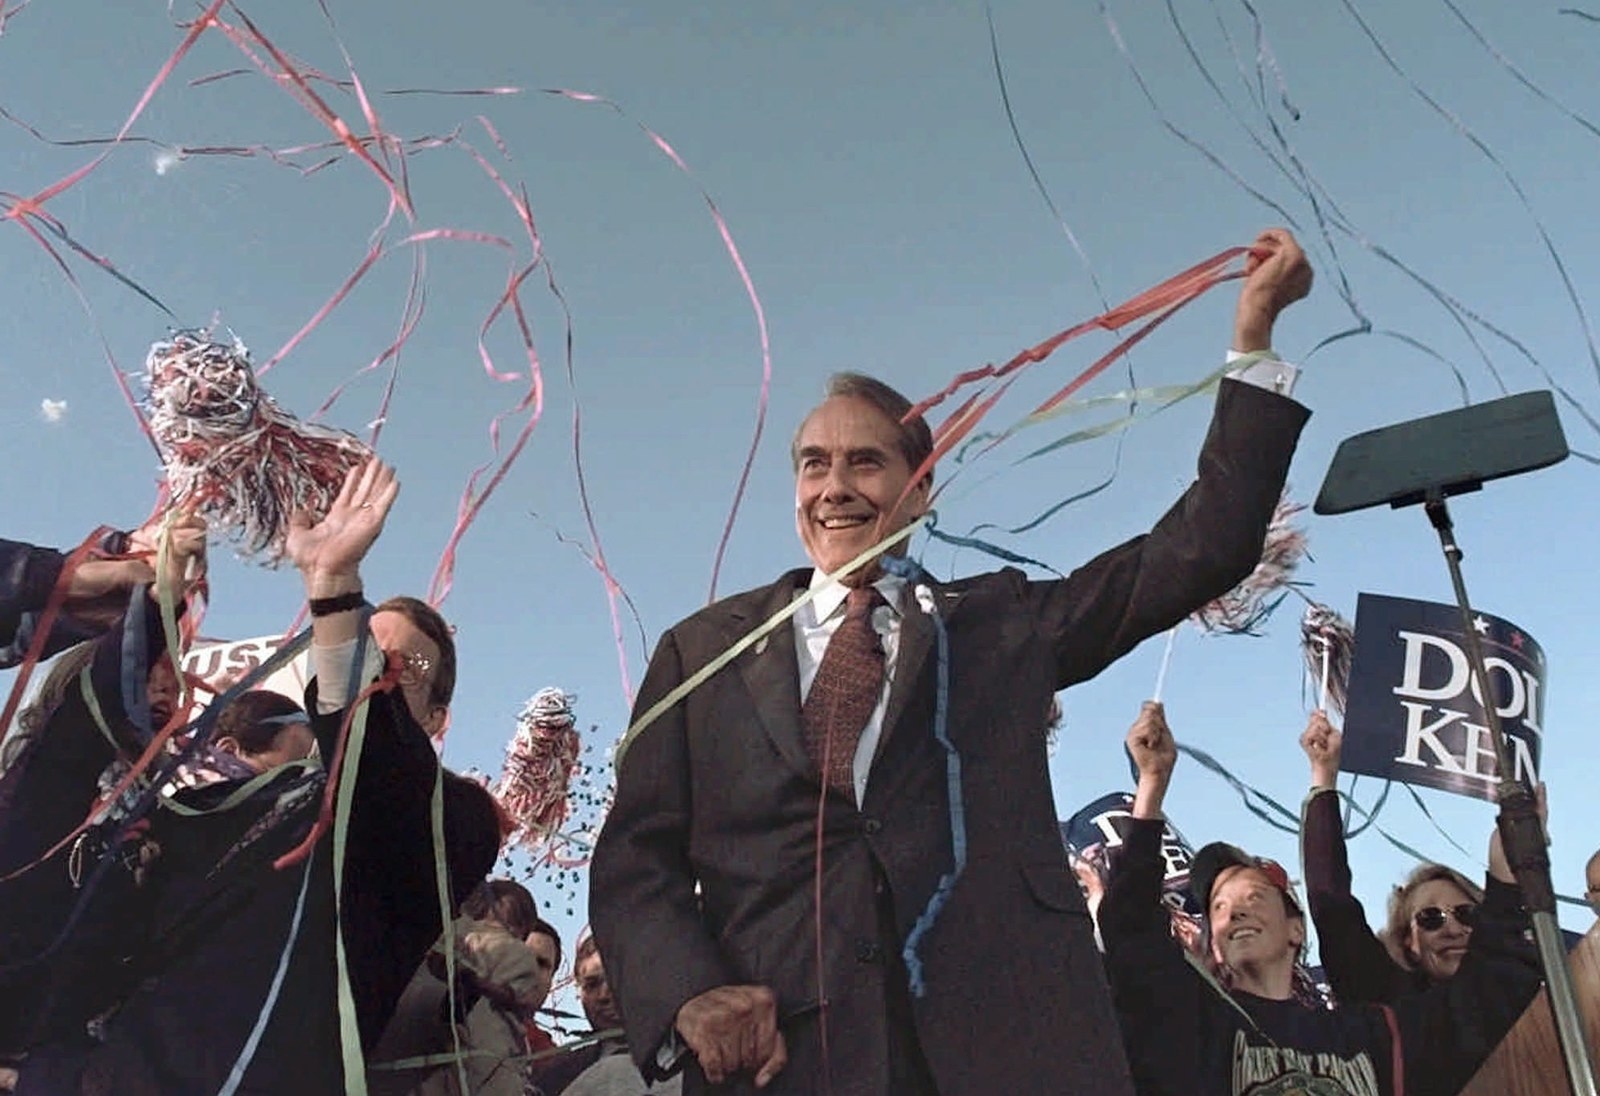 A smiling Bob Dole raises his left arm amid people waiving ribbons and banners